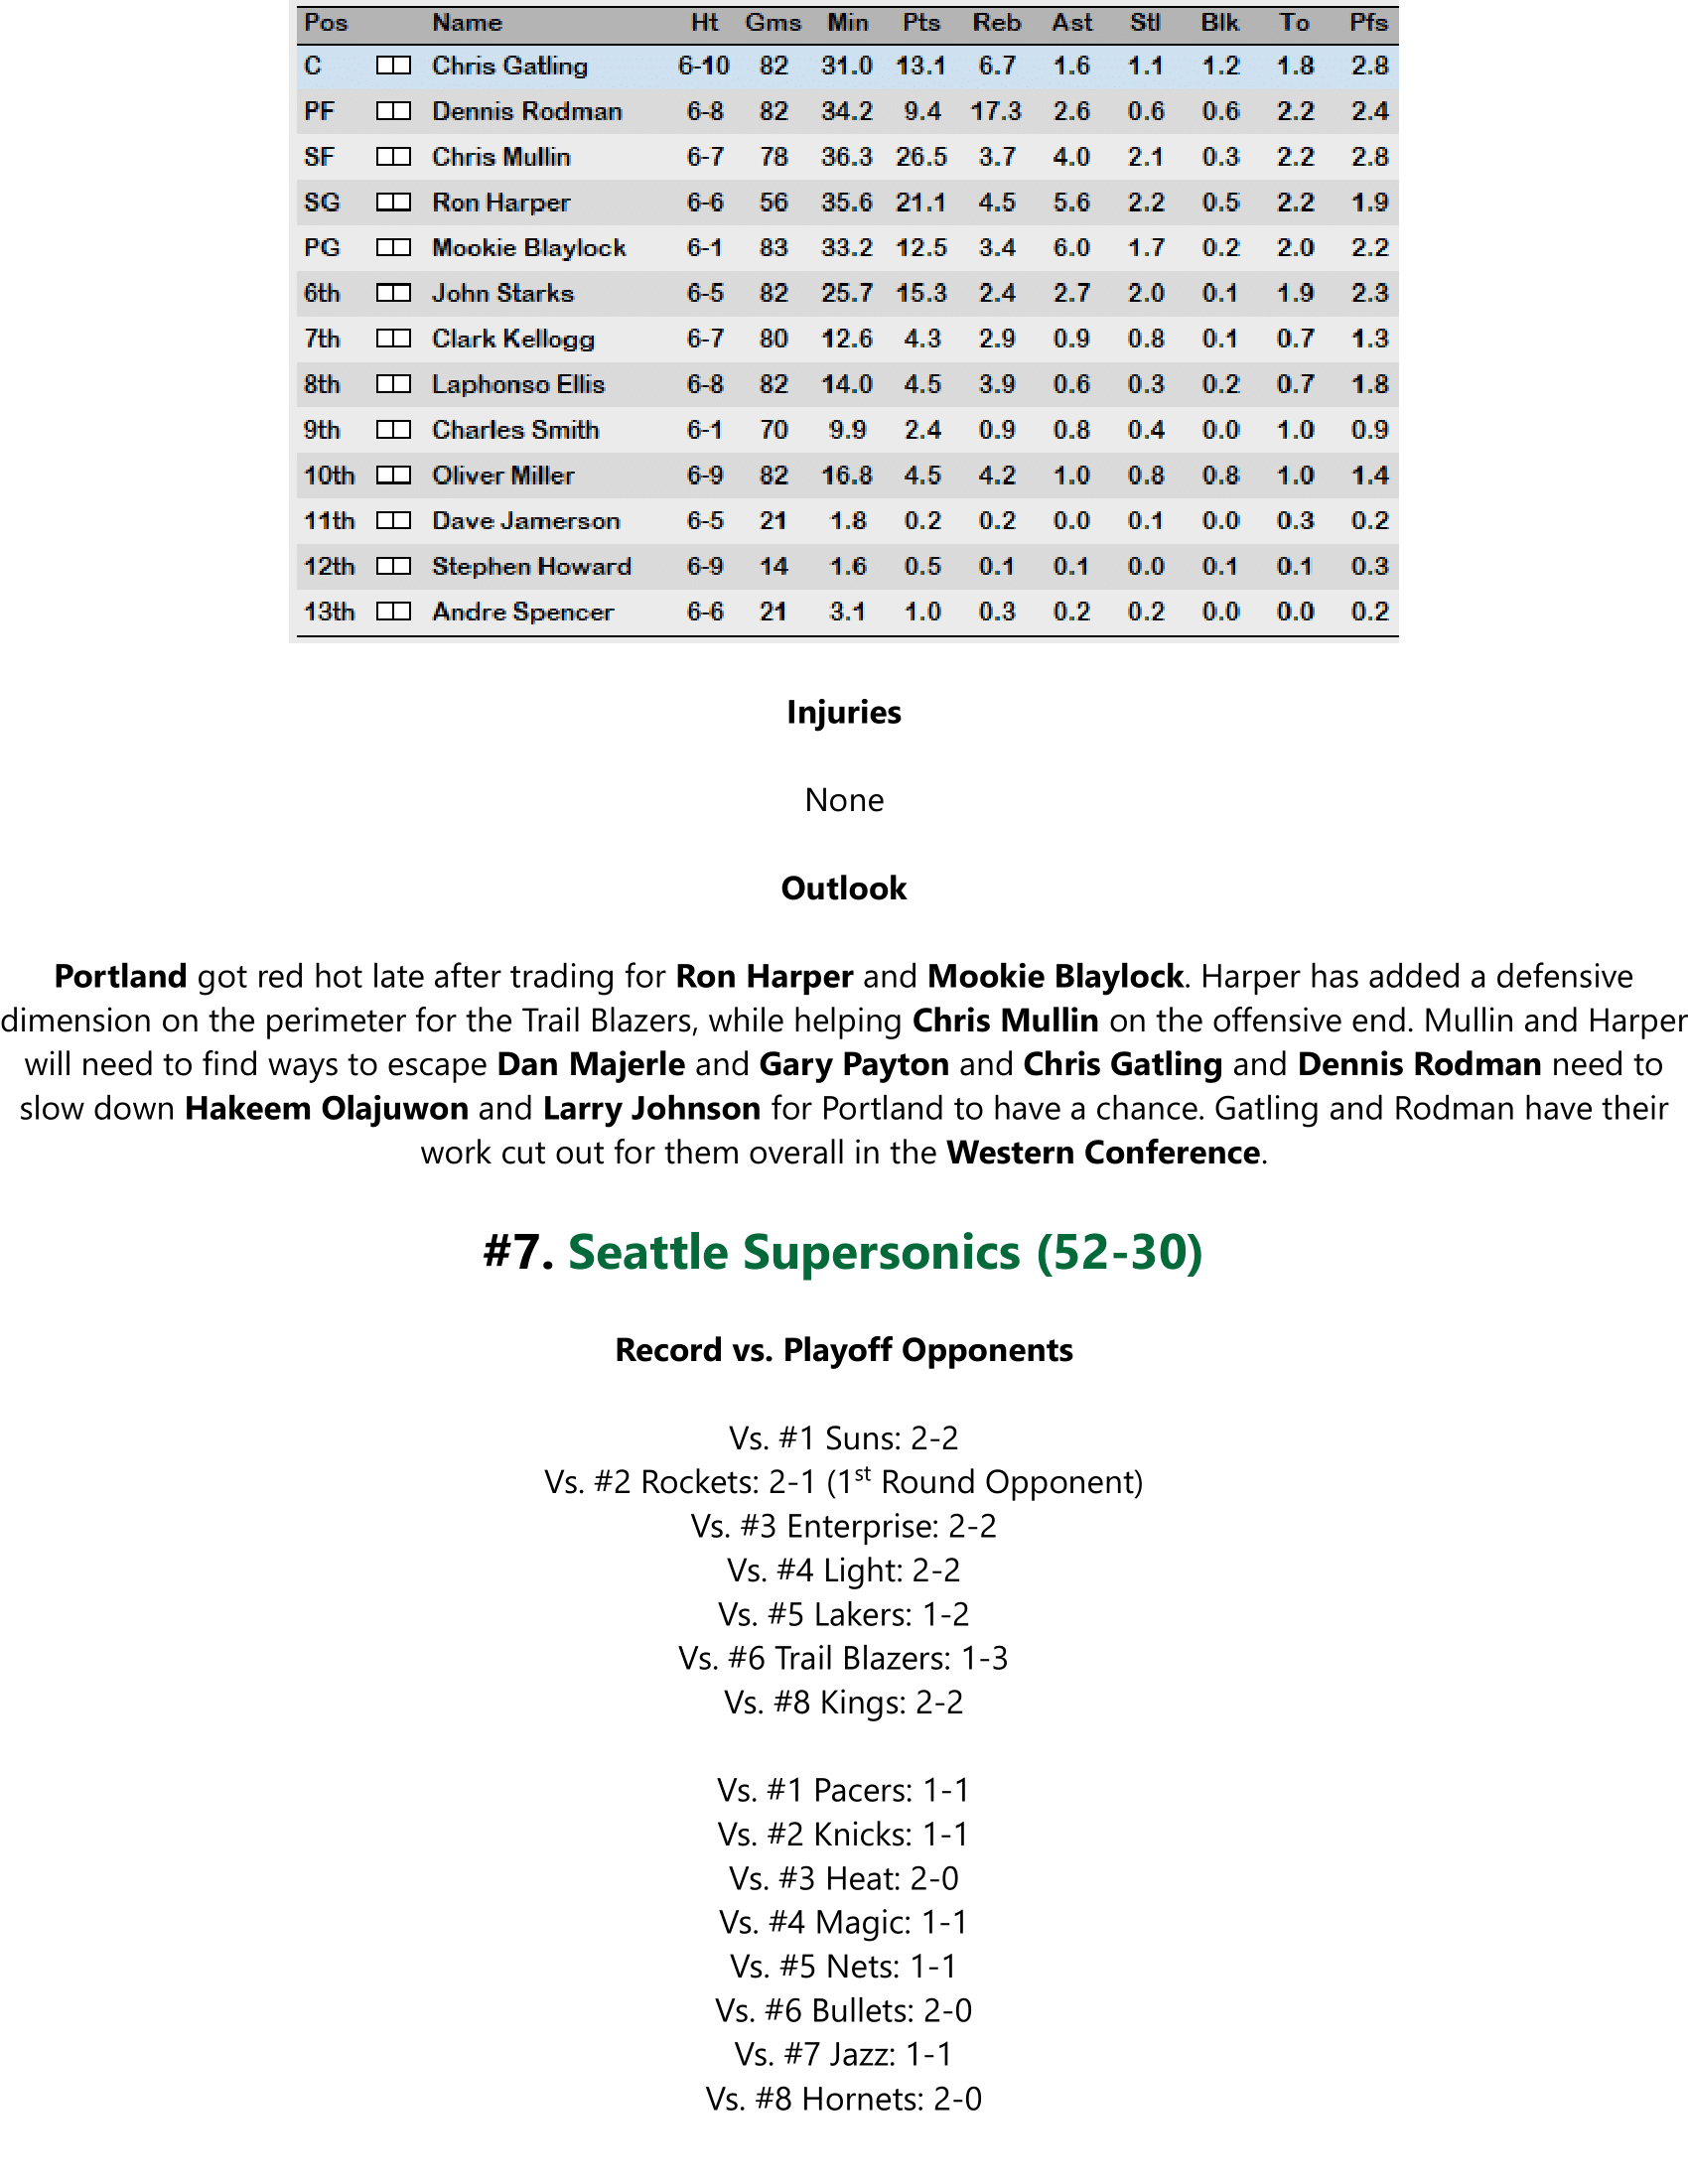 92-93-Part-4-Playoff-Preview-10.png